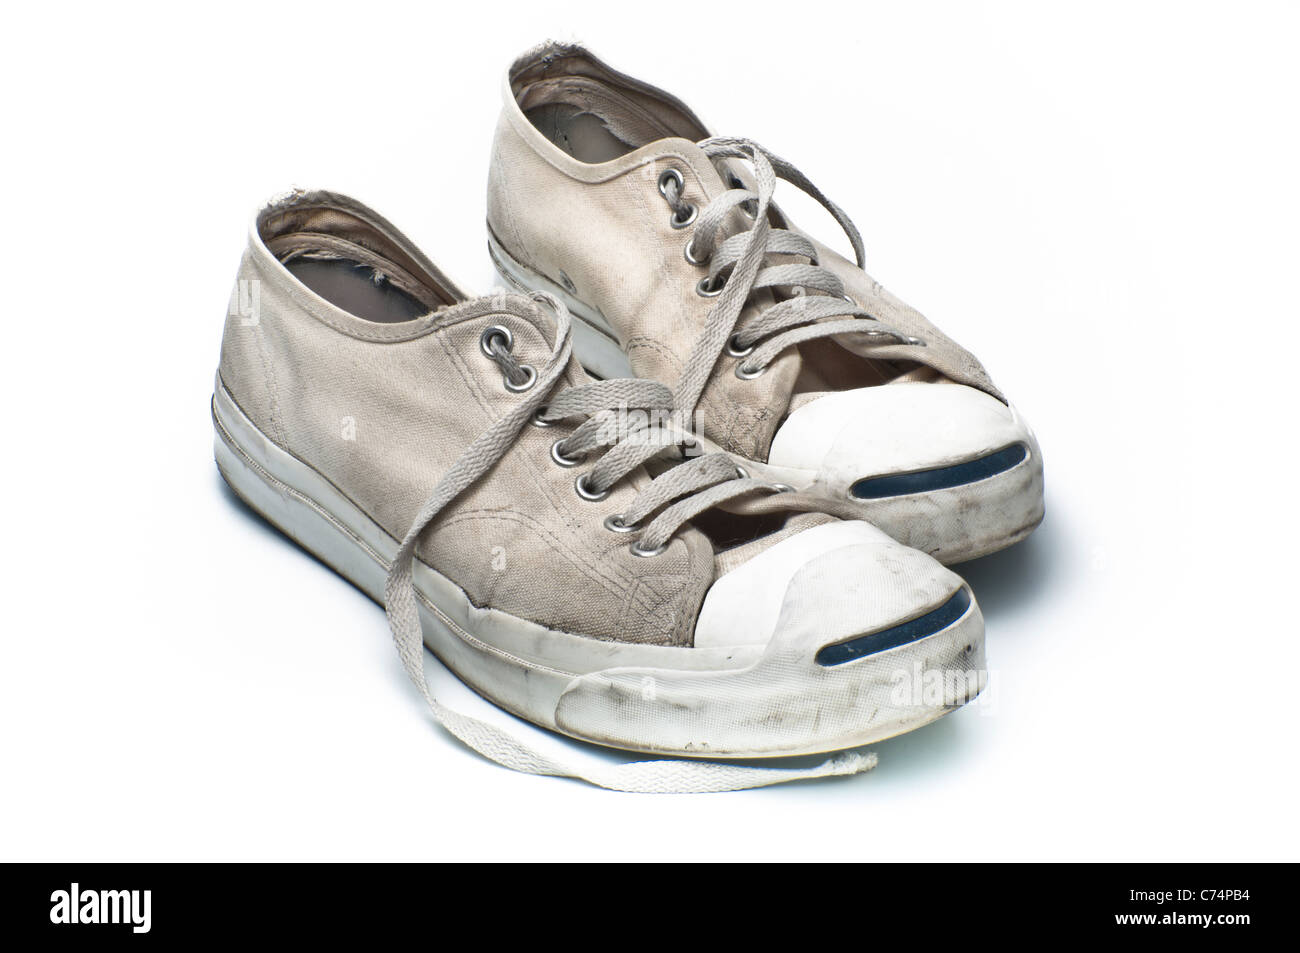 Converse Jack Purcell tennis shoes on a white background PHILLIP ROBERTS  Stock Photo - Alamy